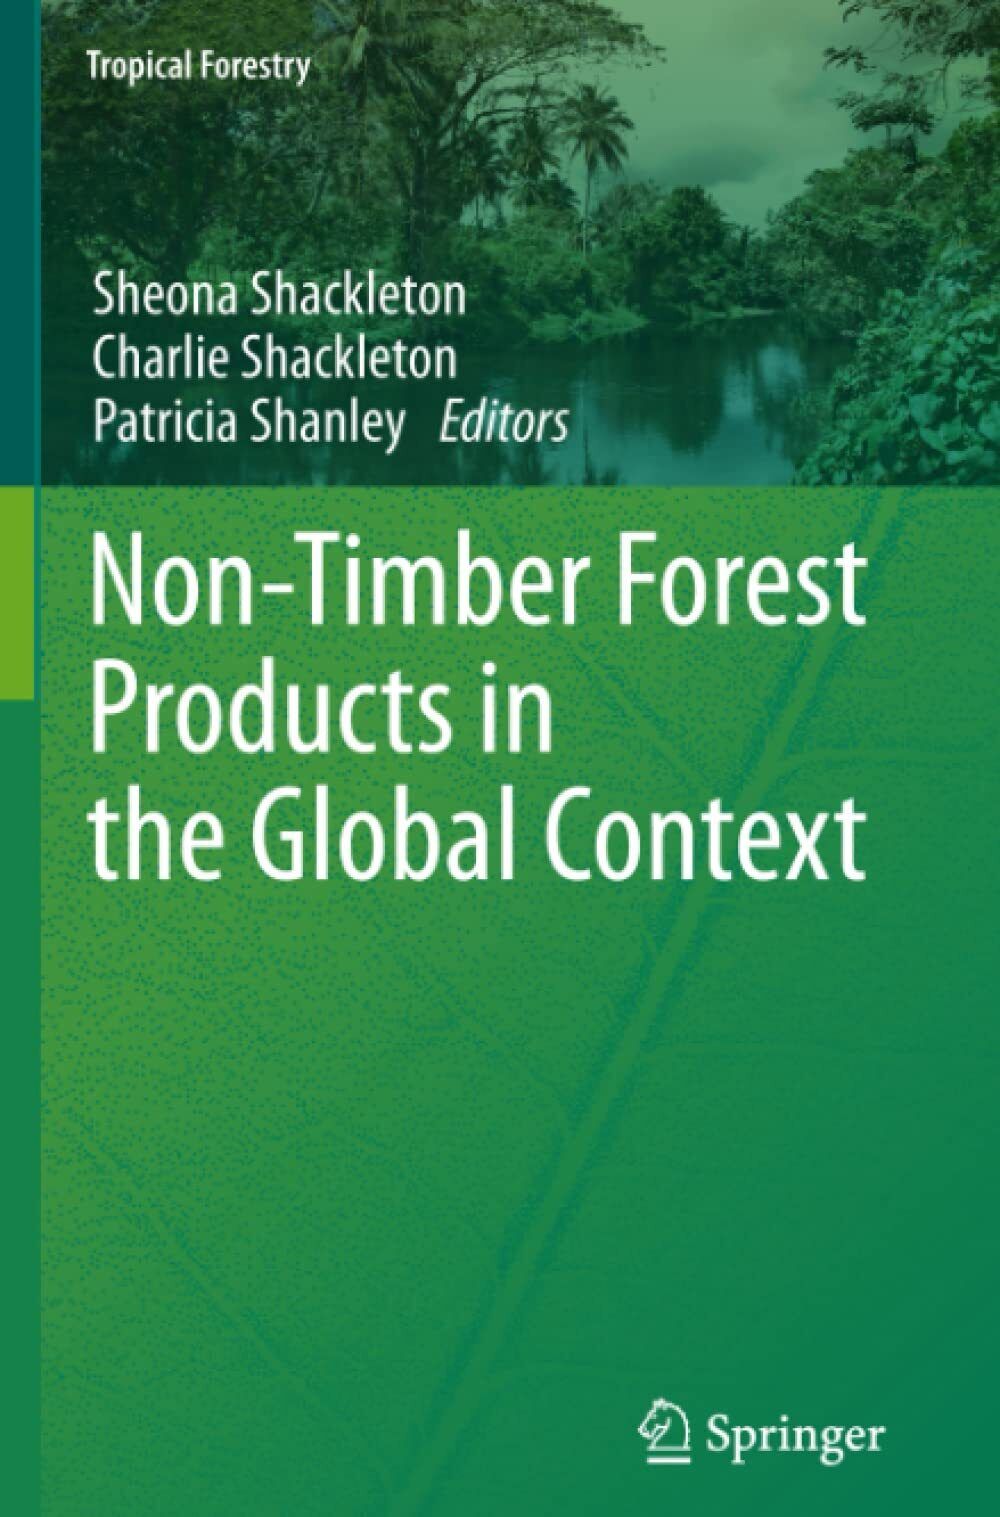 Non-Timber Forest Products in the Global Context: 7 - Sheona Shackleton - 2013